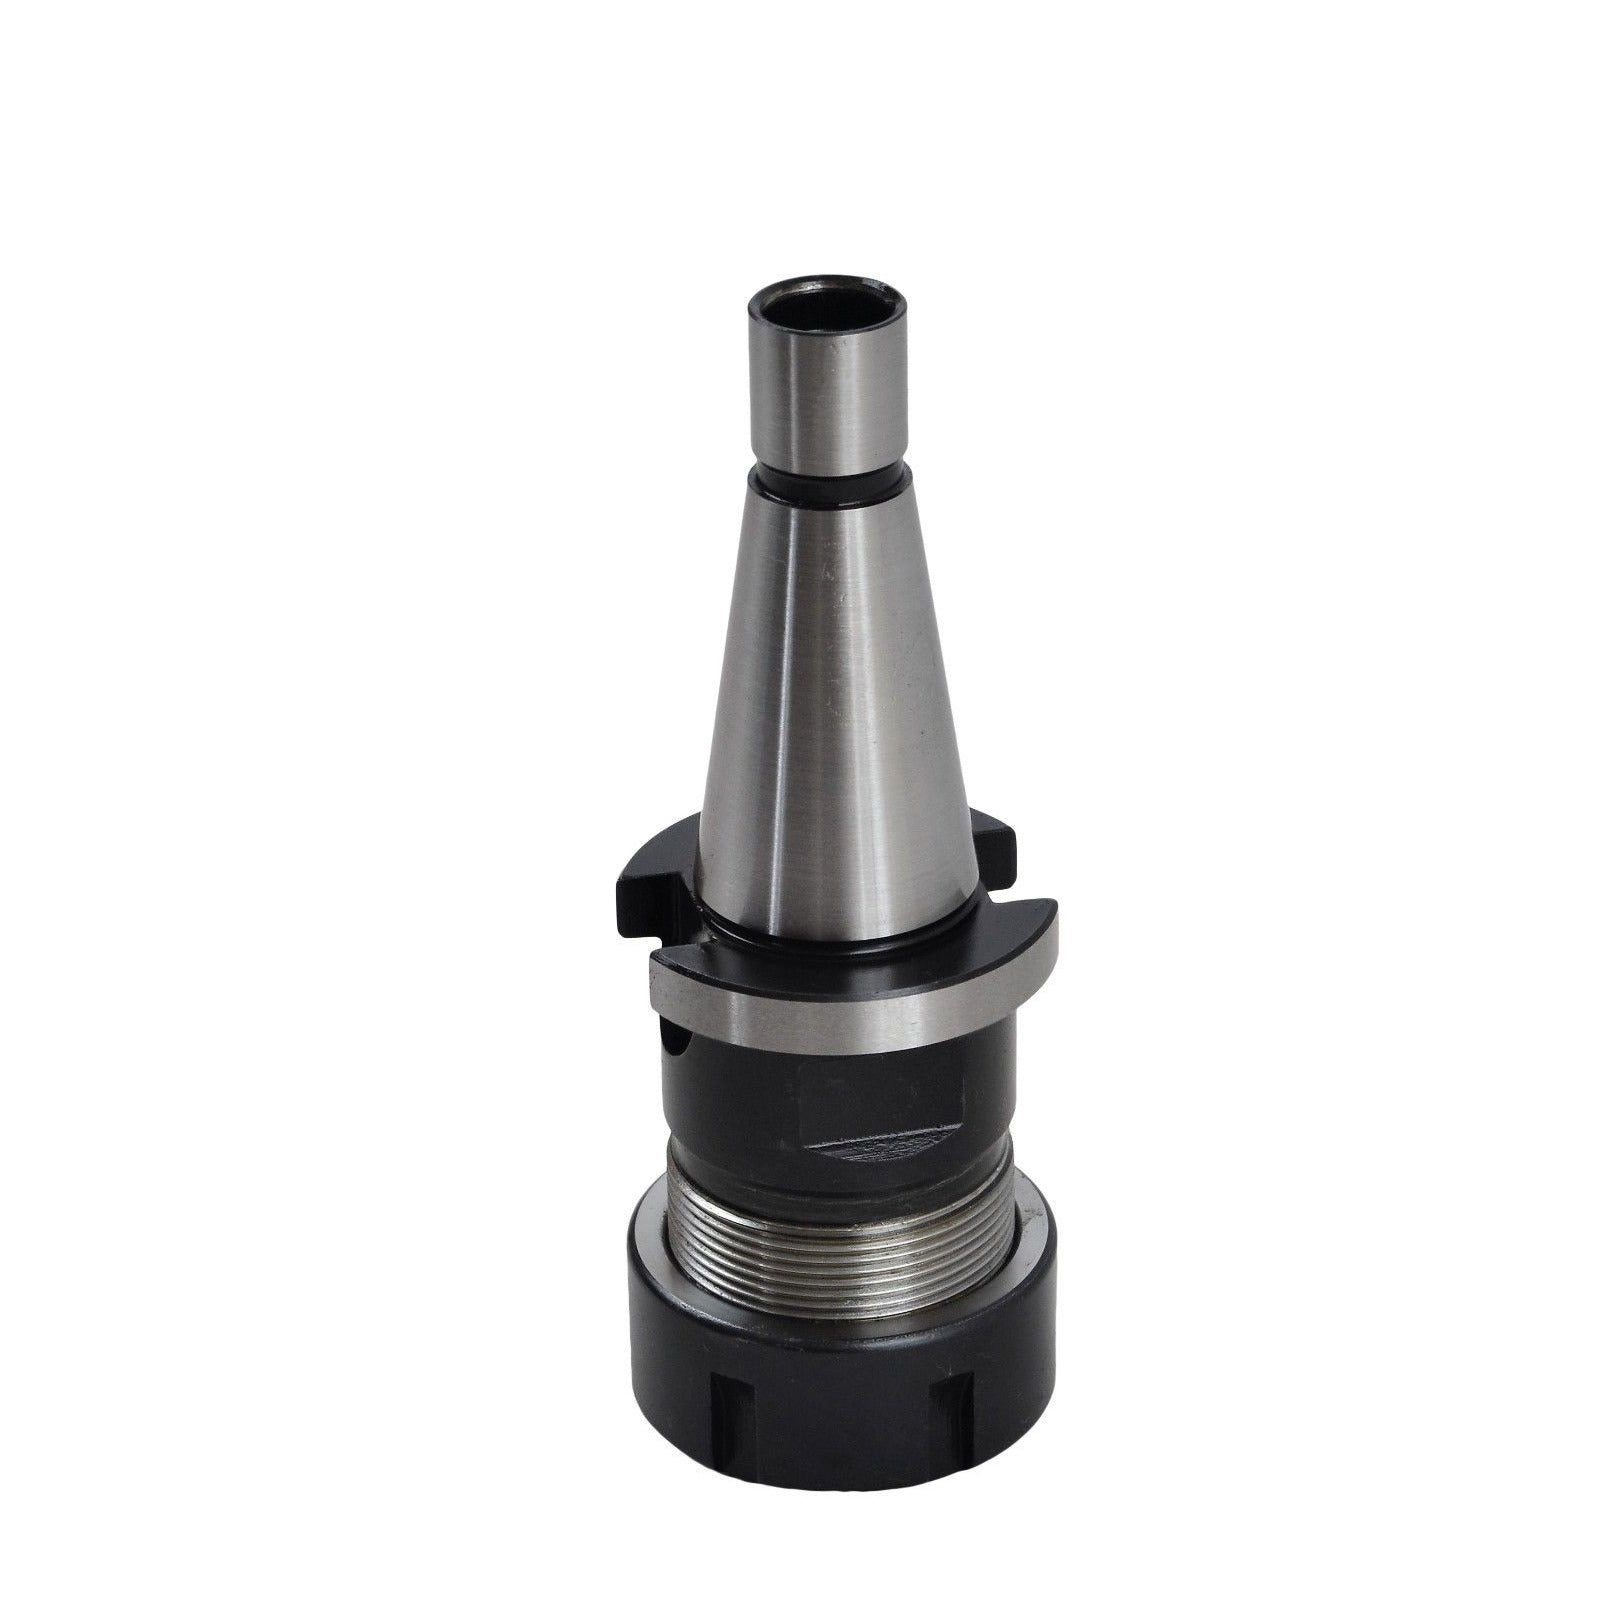 Lathe ; Milling ; NT40 - ER32 - 70 Collet Chuck Tool Holder CNC ; Router.